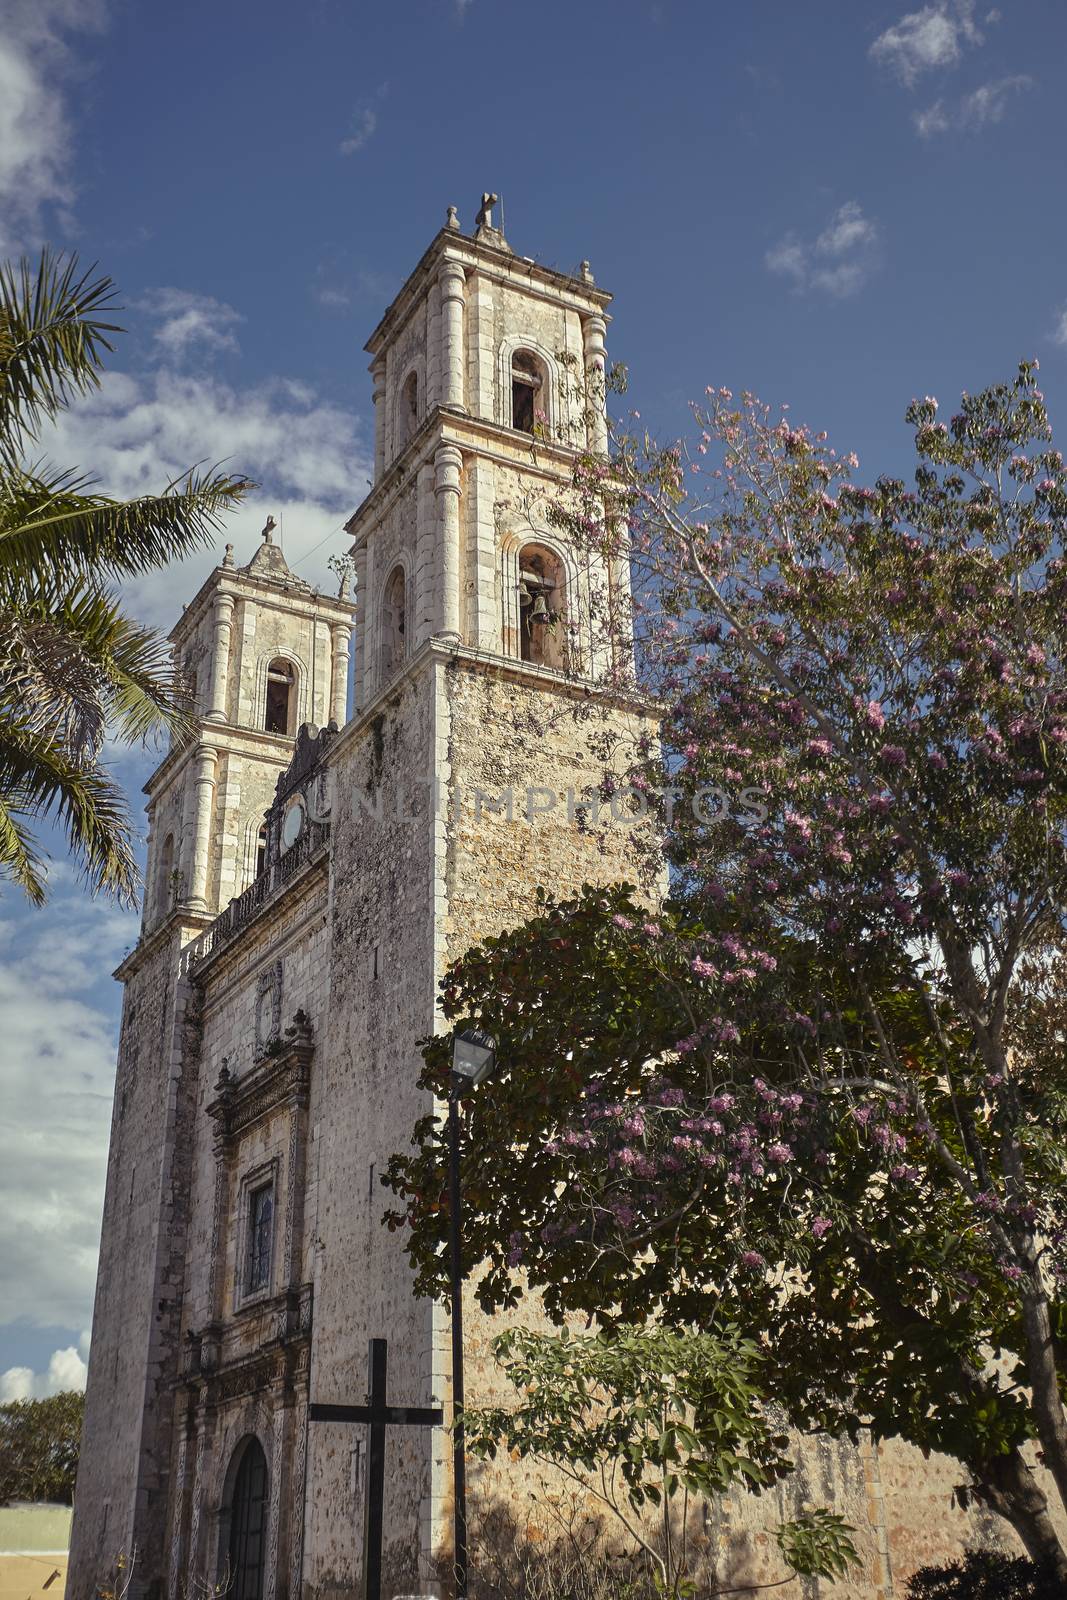 Glimpse of the Church of San Servasio in Valladolid, Mexico